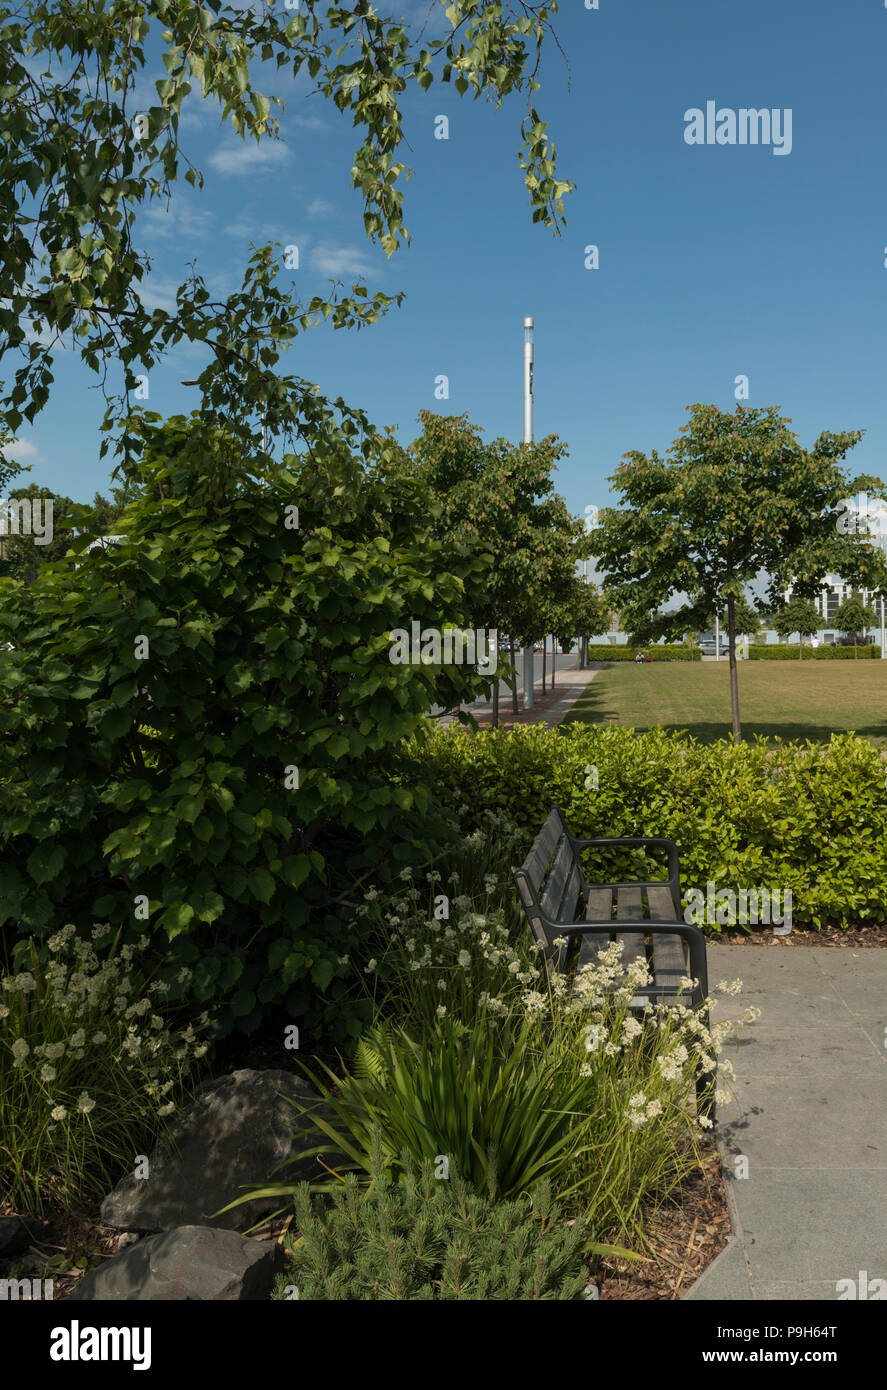 The Baltic connections pocket garden, in Slessor Gardens, is part of the Dundee Waterfront development scheme, Dundee, Scotland, UK. Stock Photo